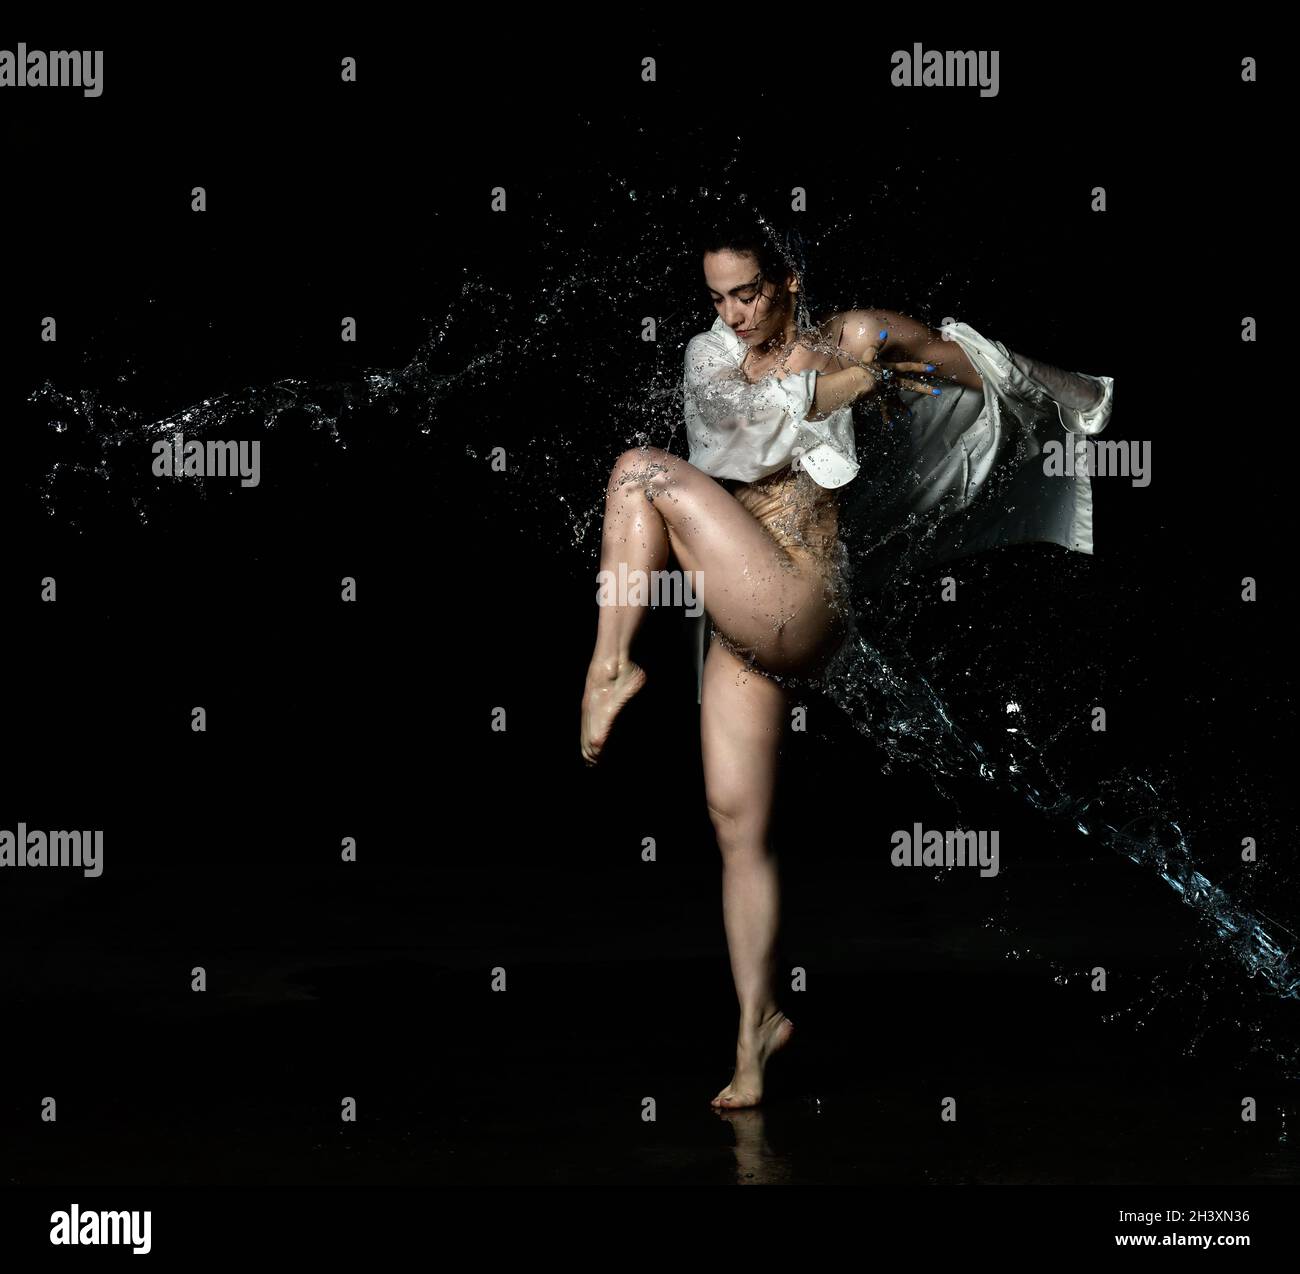 Young beautiful woman of Caucasian appearance with long black hair is dancing in a white shirt in the rain on a black background Stock Photo